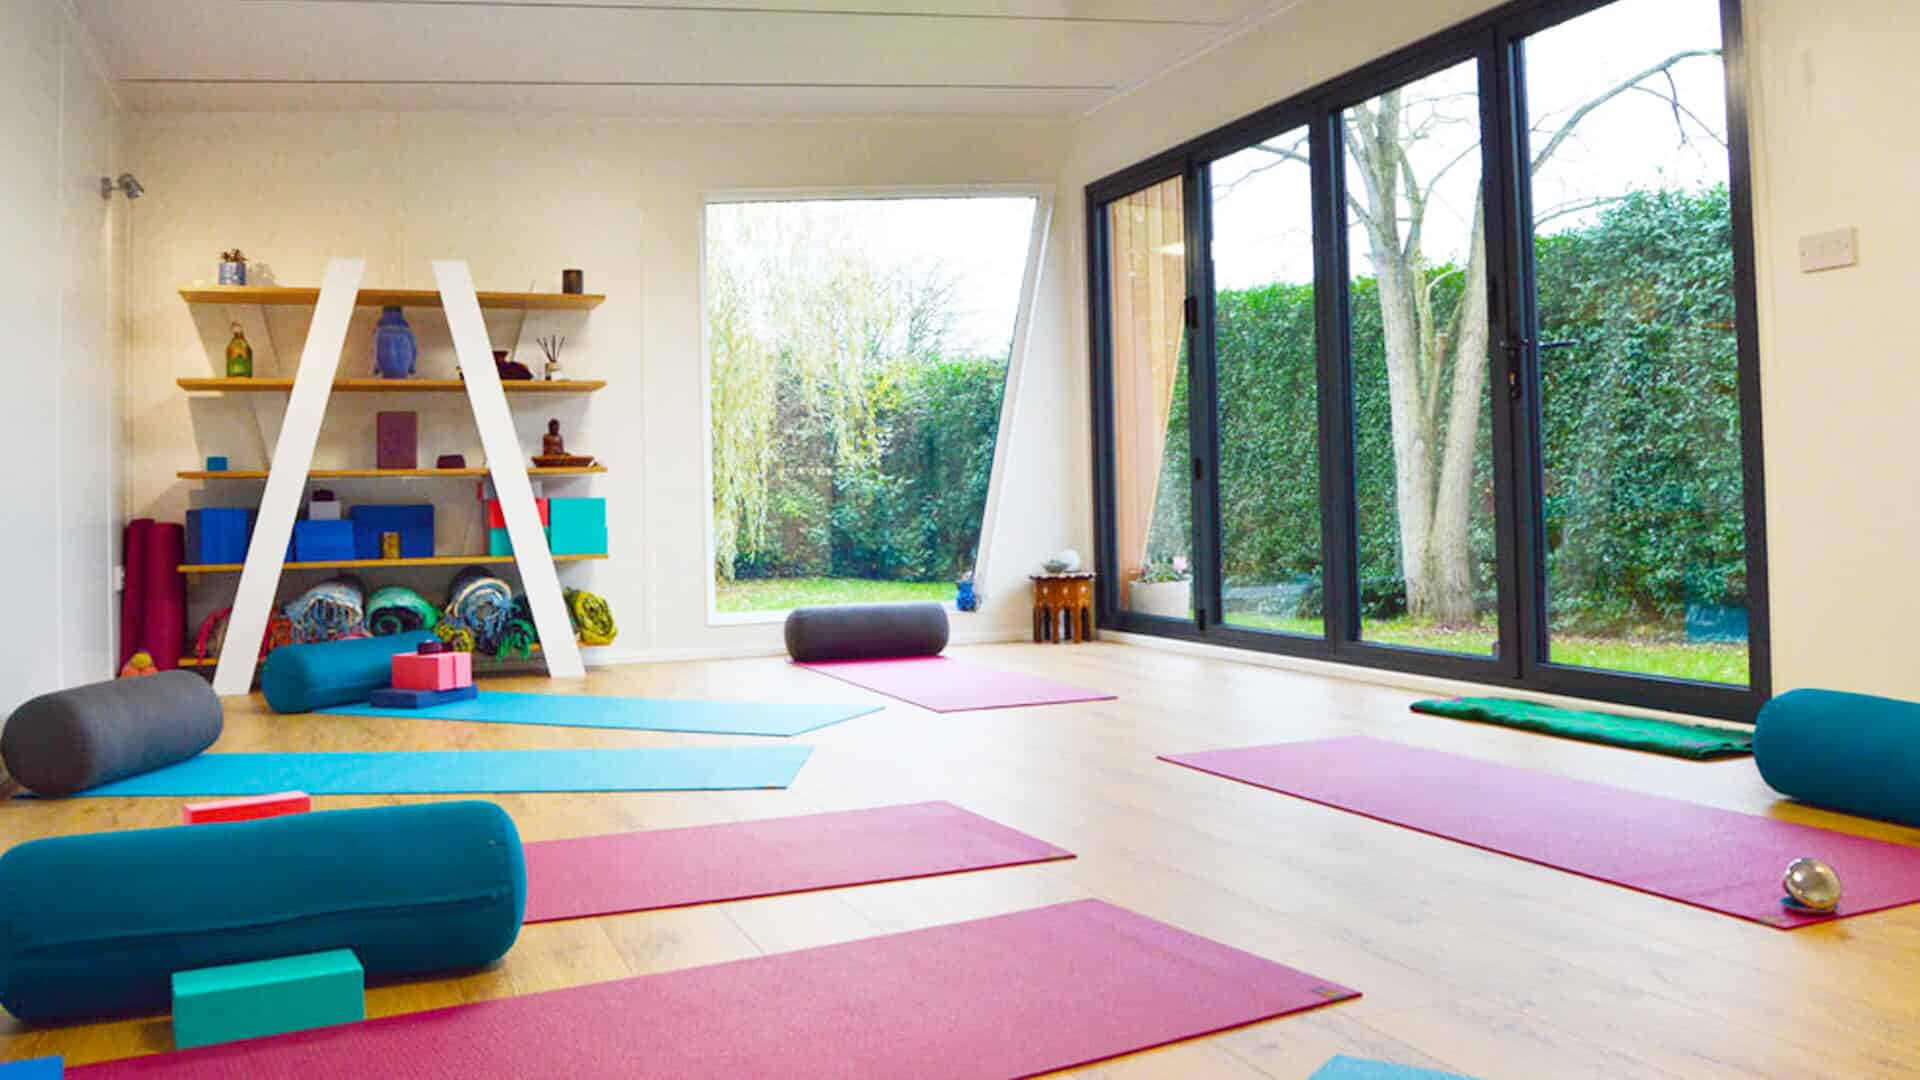 Green Retreats garden room that is being used as a yoga studio